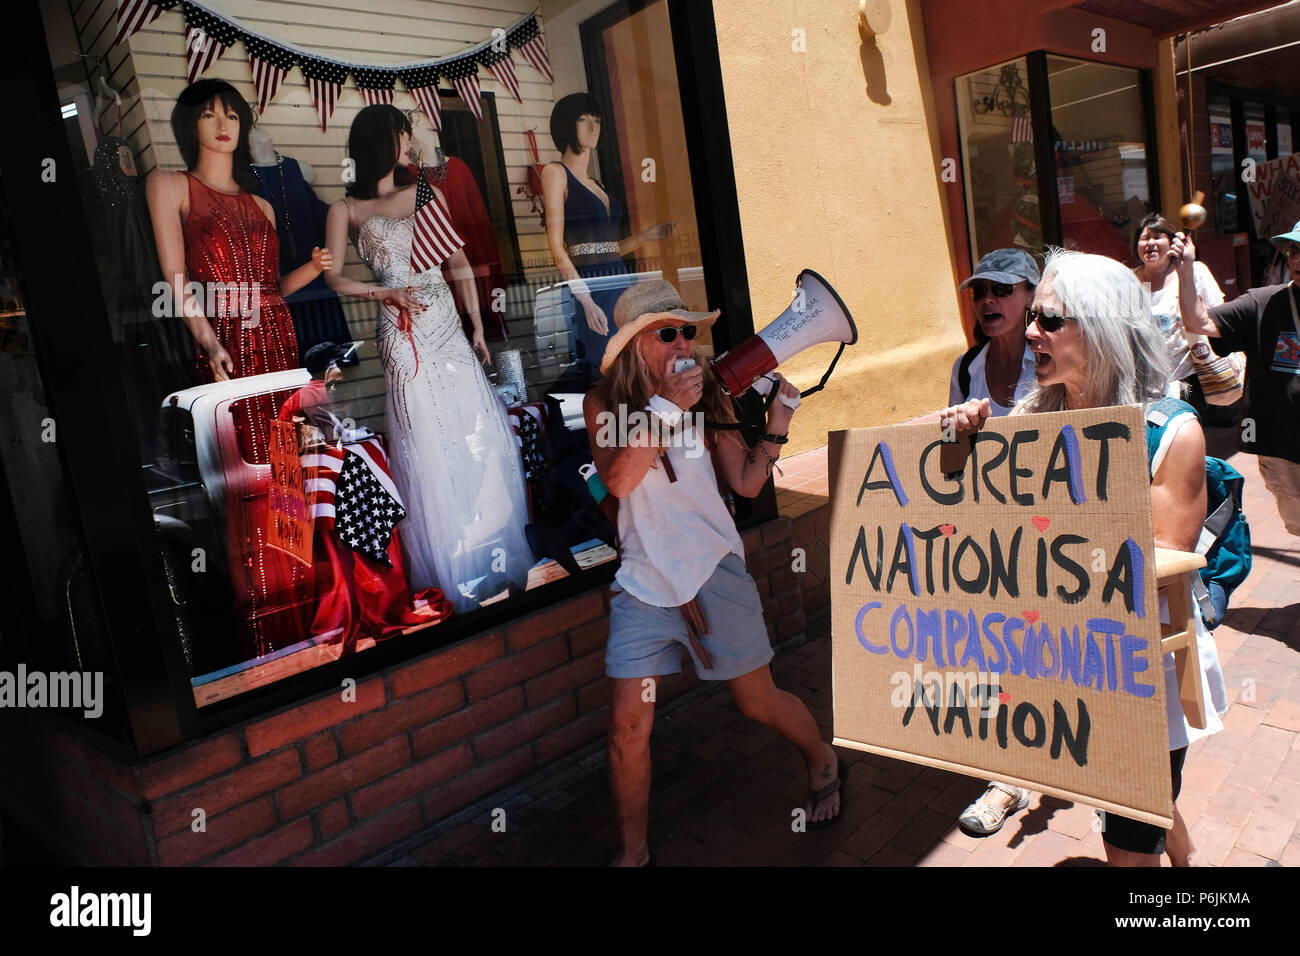 Nogales, Arizona, USA. 30th June, 2018. Families Belong Together hold protest march in Nogales, Arizona. It was one of hundreds demonstrations throughout the United States against the Trump administrations policy of separating children from their parents who are caught entering the U.S. illegally . Although the President has since reversed his original decision thousands of migrant children remain apart from their parents. Protestors marched through the border town of Nogales and ended up blocking traffic at the DeConcini port of entry for several hours. (Credit Image: © Christopher Brown via Stock Photo